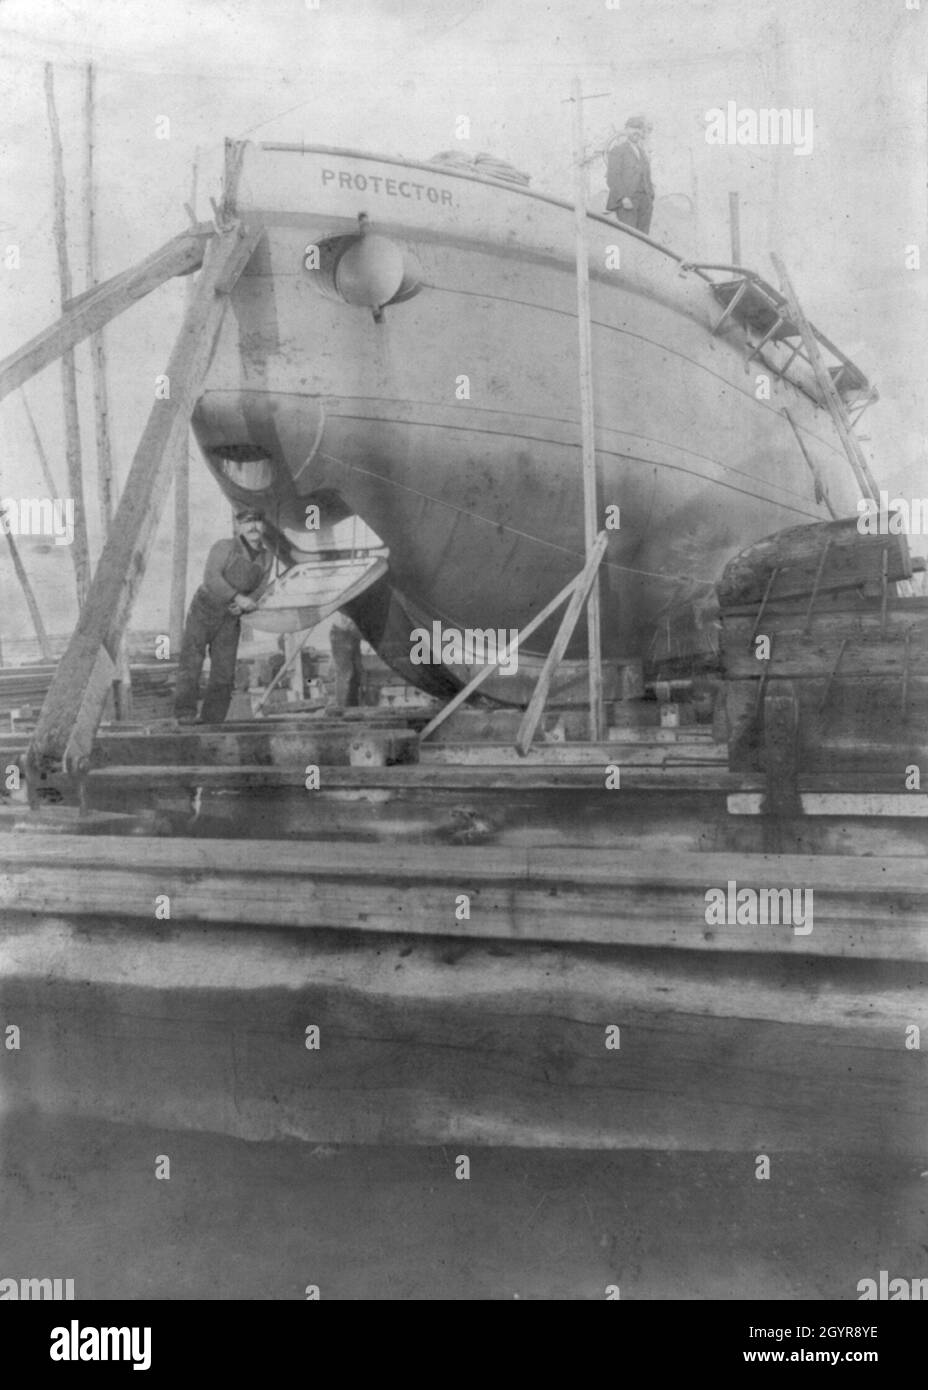 A vintage photo circa 1901 of the US submarine Protector designed by the engineer Simon Lake and built by the Lake Torpedo Boat Company in Bridgeport, Connecticut.  Protector was the first submarine to have diving planes mounted forward of the conning tower and a flat keel.  Protector was sold to Imperial Russia in 1904 and renamed Osetr Stock Photo